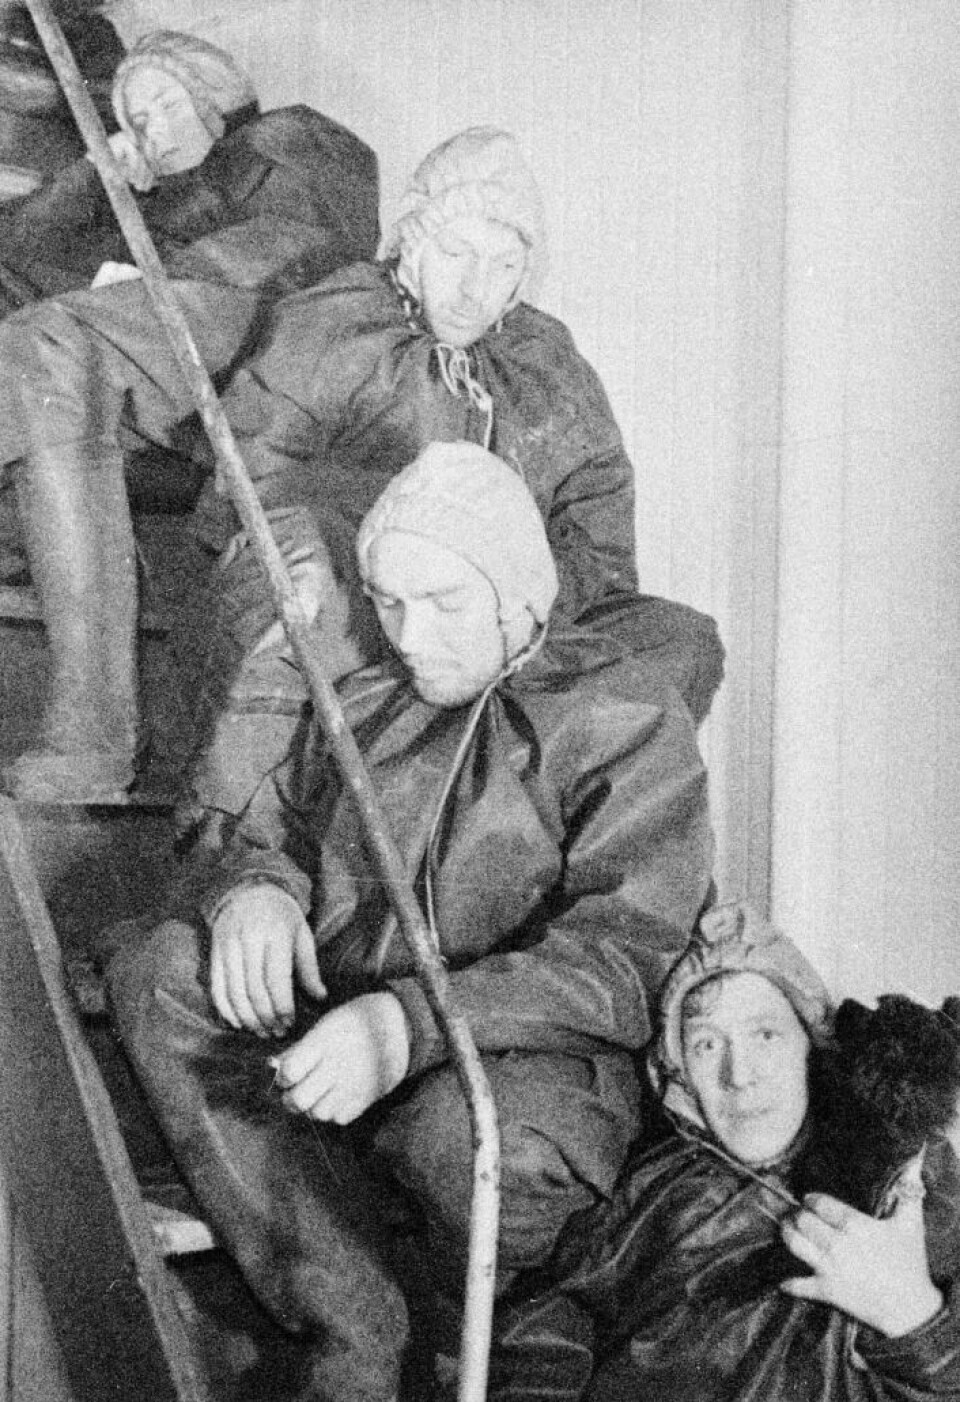 The war sailors knew little about what was happening to their families in Norway and vice versa. Several families were informed that ships had sunk and the crew was lost, while it later turned out that they were saved or had been captured. This photo was taken during a submarine attack. The sailors are resting, but are ready to jump into the sea at short notice.